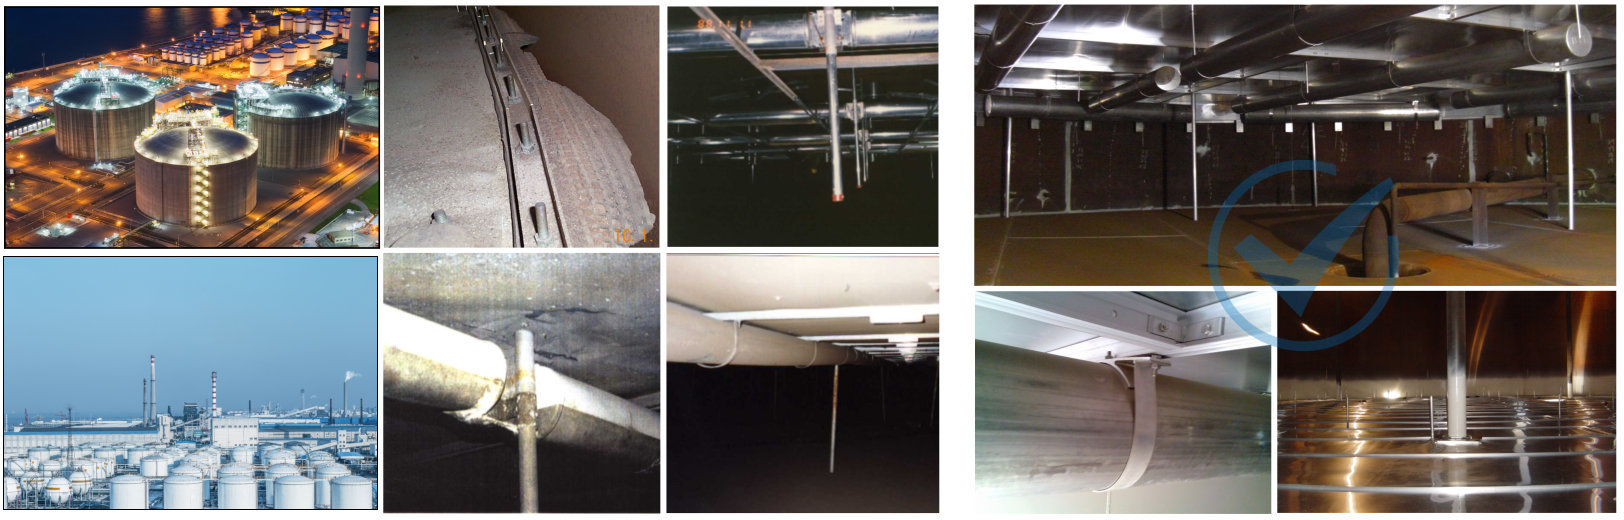 Internal-Floating-Roofs-Inspection-Maintenance-and-Repair-in-accordance-with-EEMUA-PUBLICATION-159